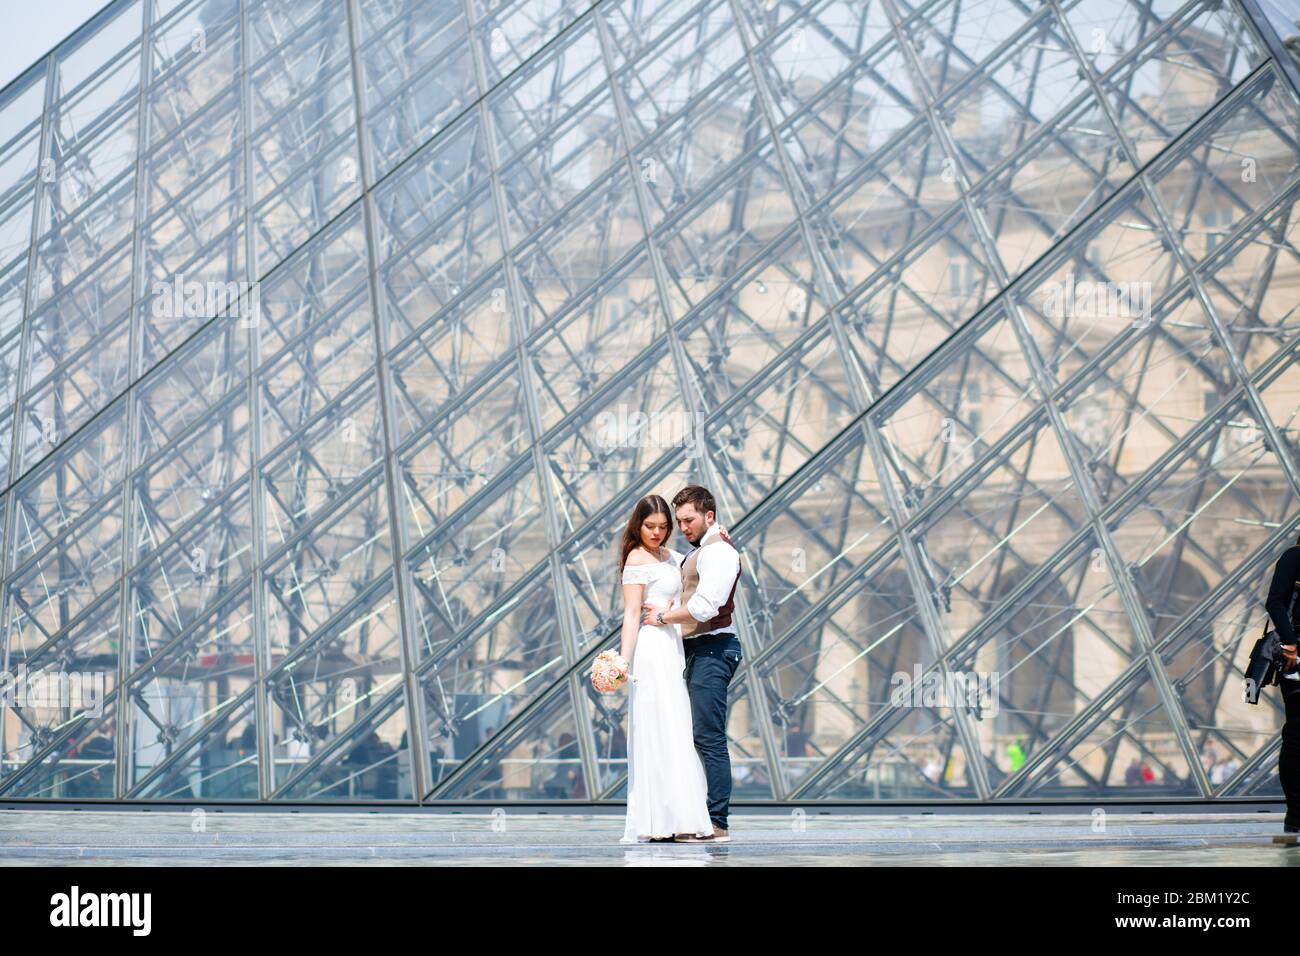 wedding couple. The bride in a beautiful wedding dress, the bride in a stylish tuxedo, Paris France. Stock Photo